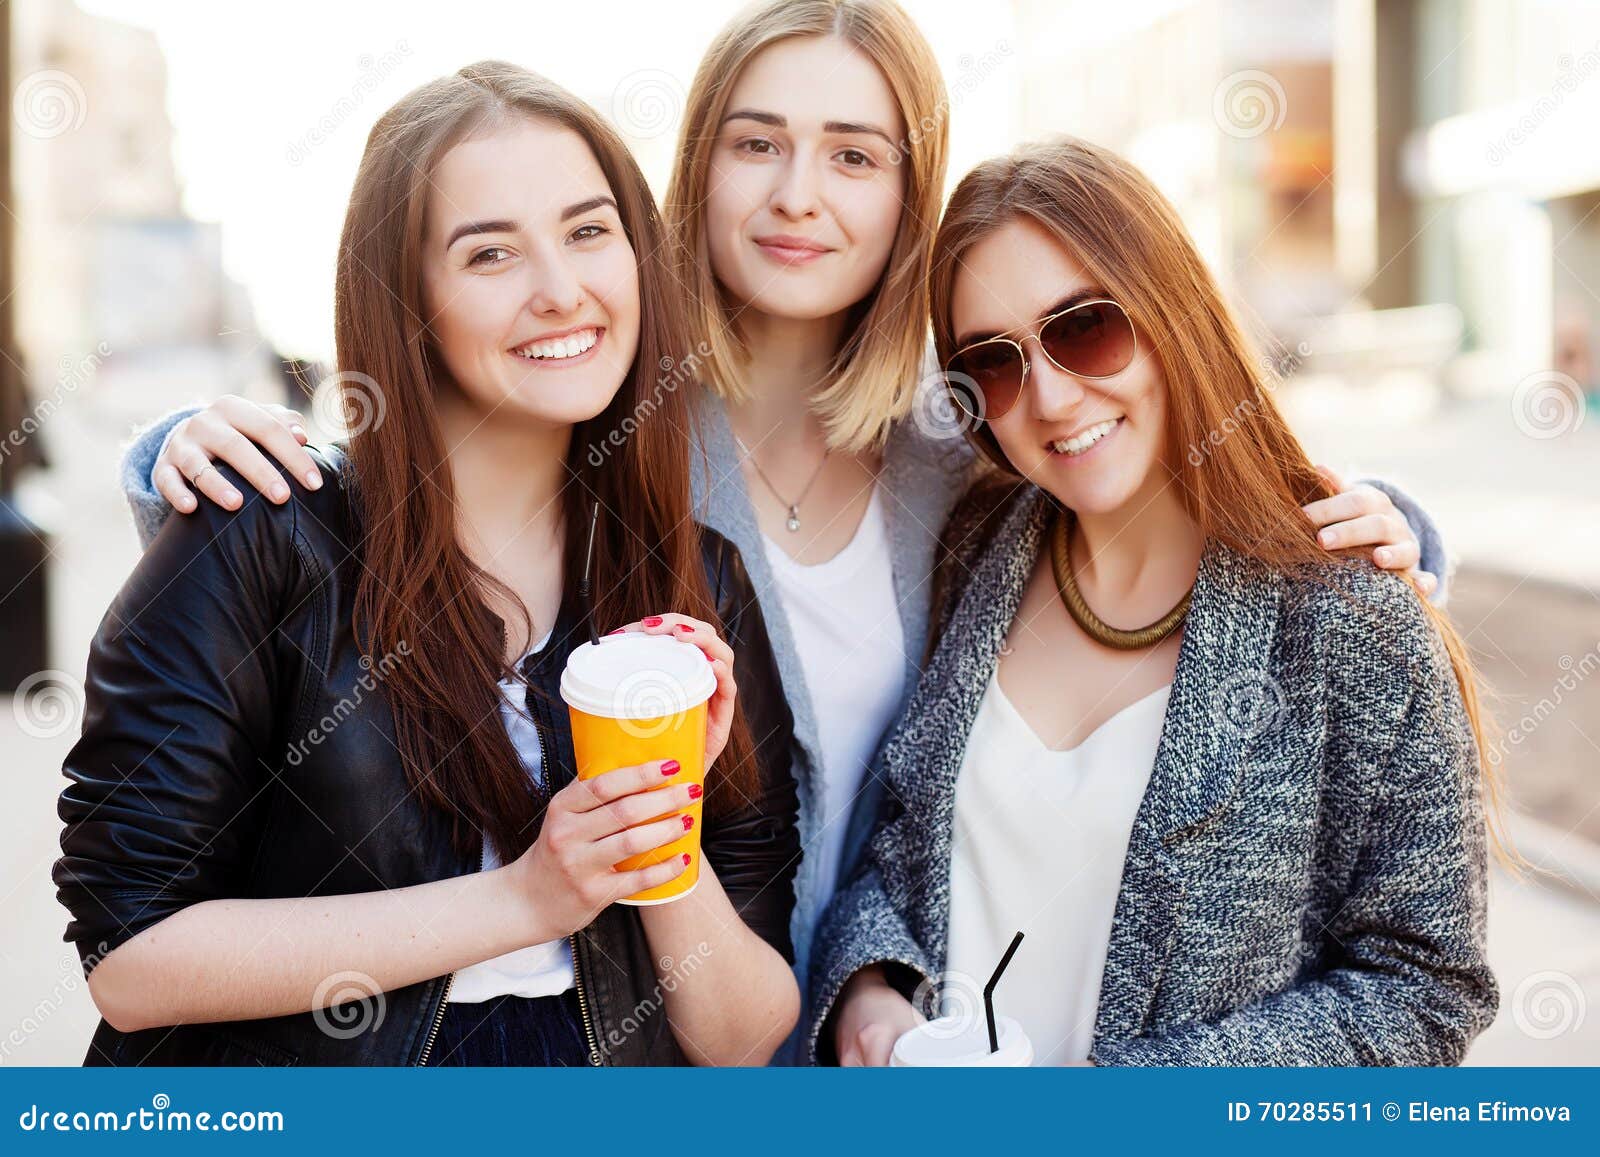 Three Young Women, Best Friends Smiling at the Camera Stock Image ...